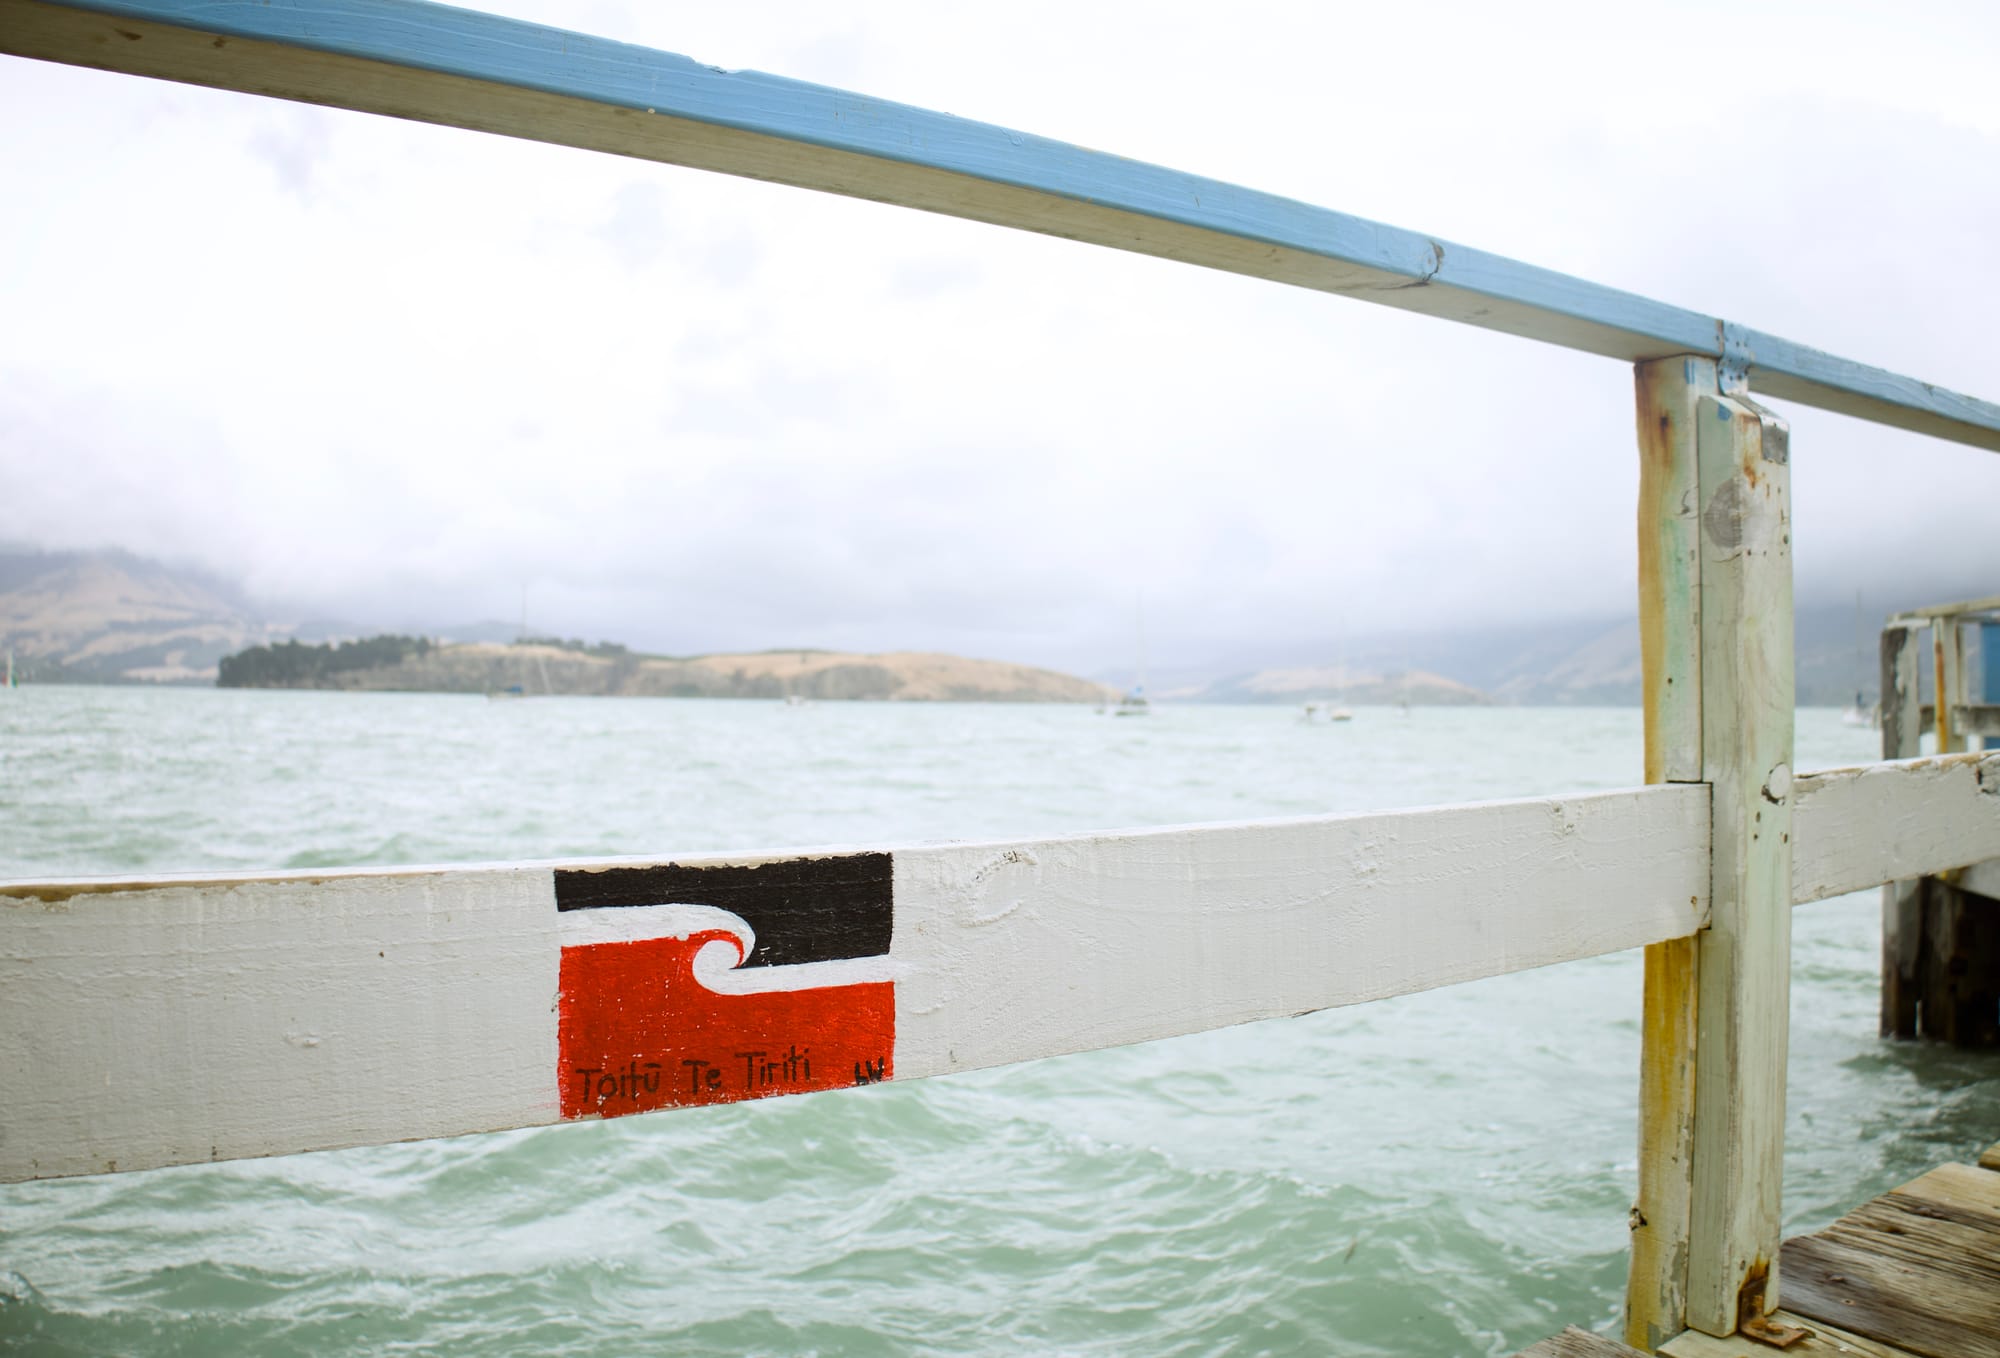 A close up of railing on a dock, with the tino rangatiratanga flag painted on horizontal post. The sea in the background is choppy and the clouds are grey.